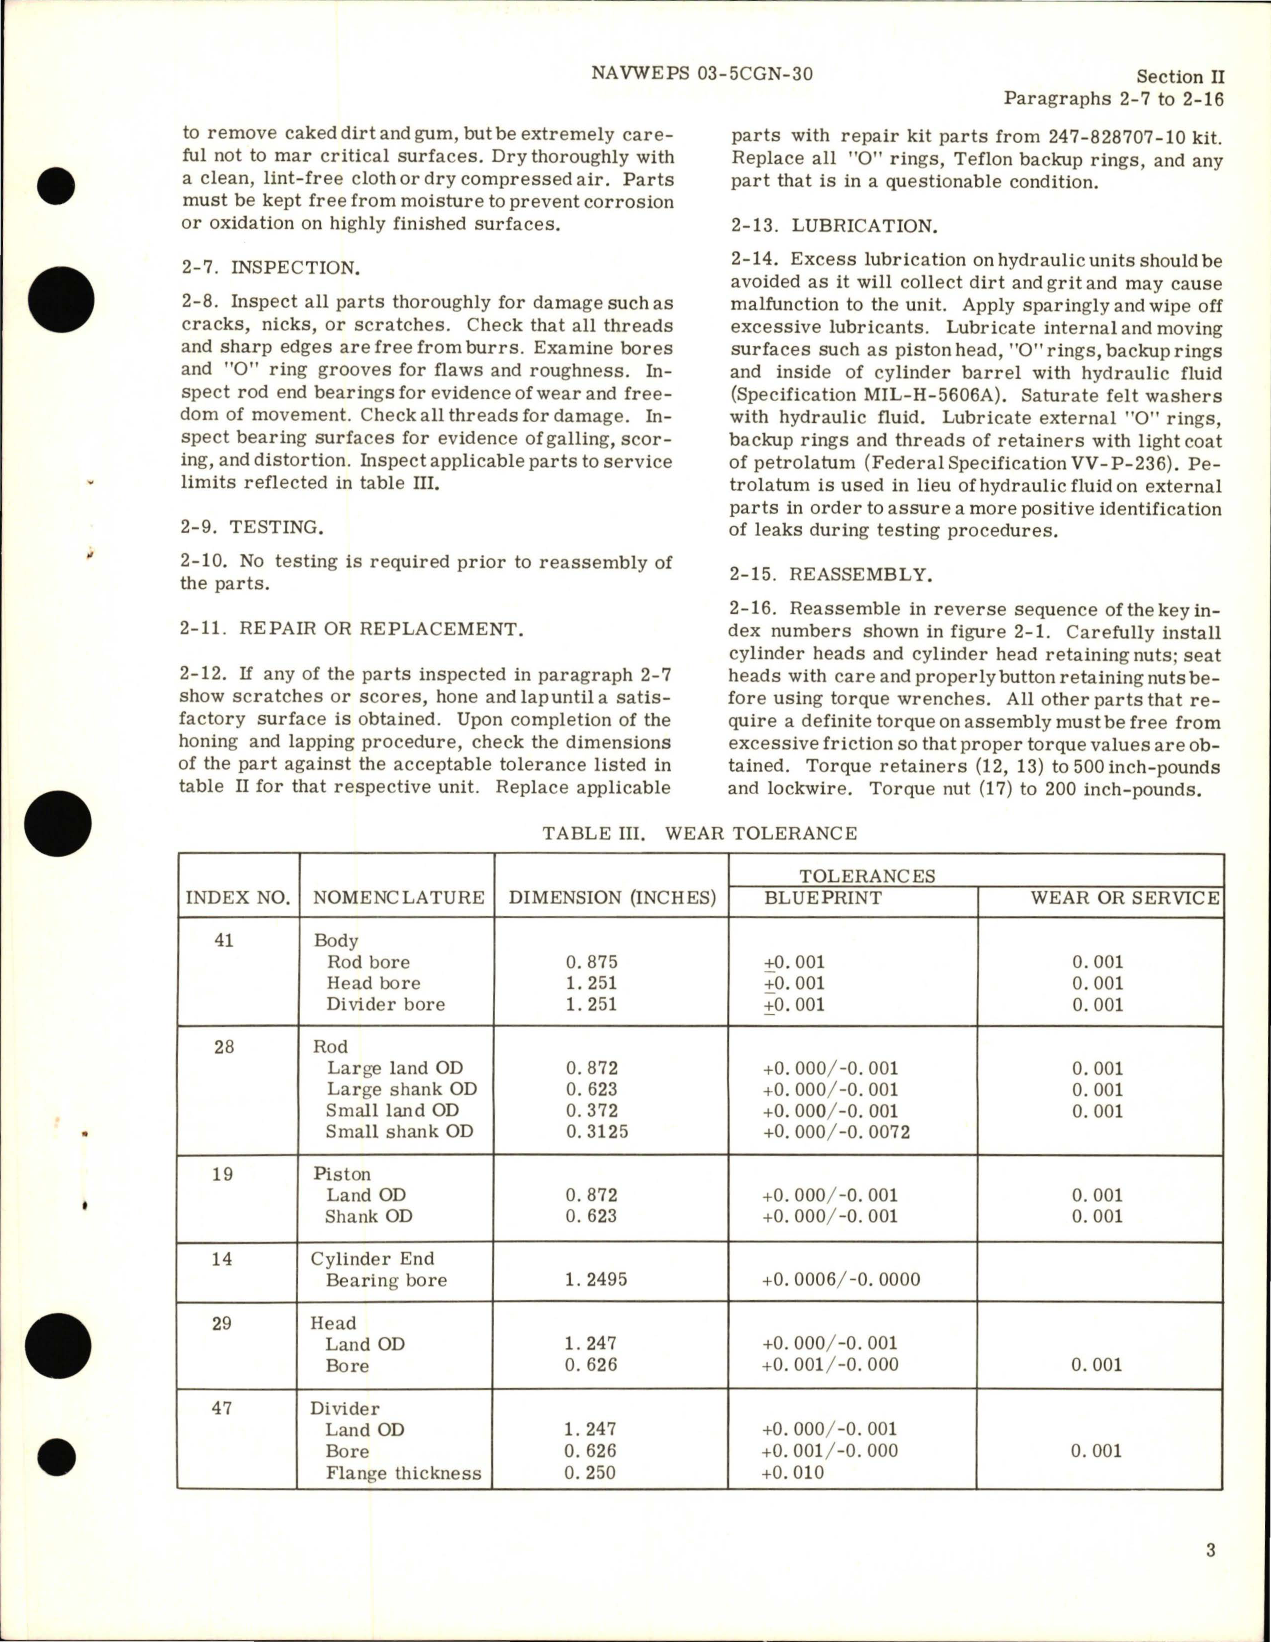 Sample page 5 from AirCorps Library document: Overhaul Instructions for Hydraulic Flight Control, Spoiler Master Actuator Assembly - Part 247-58707-21 and 247-58707-31